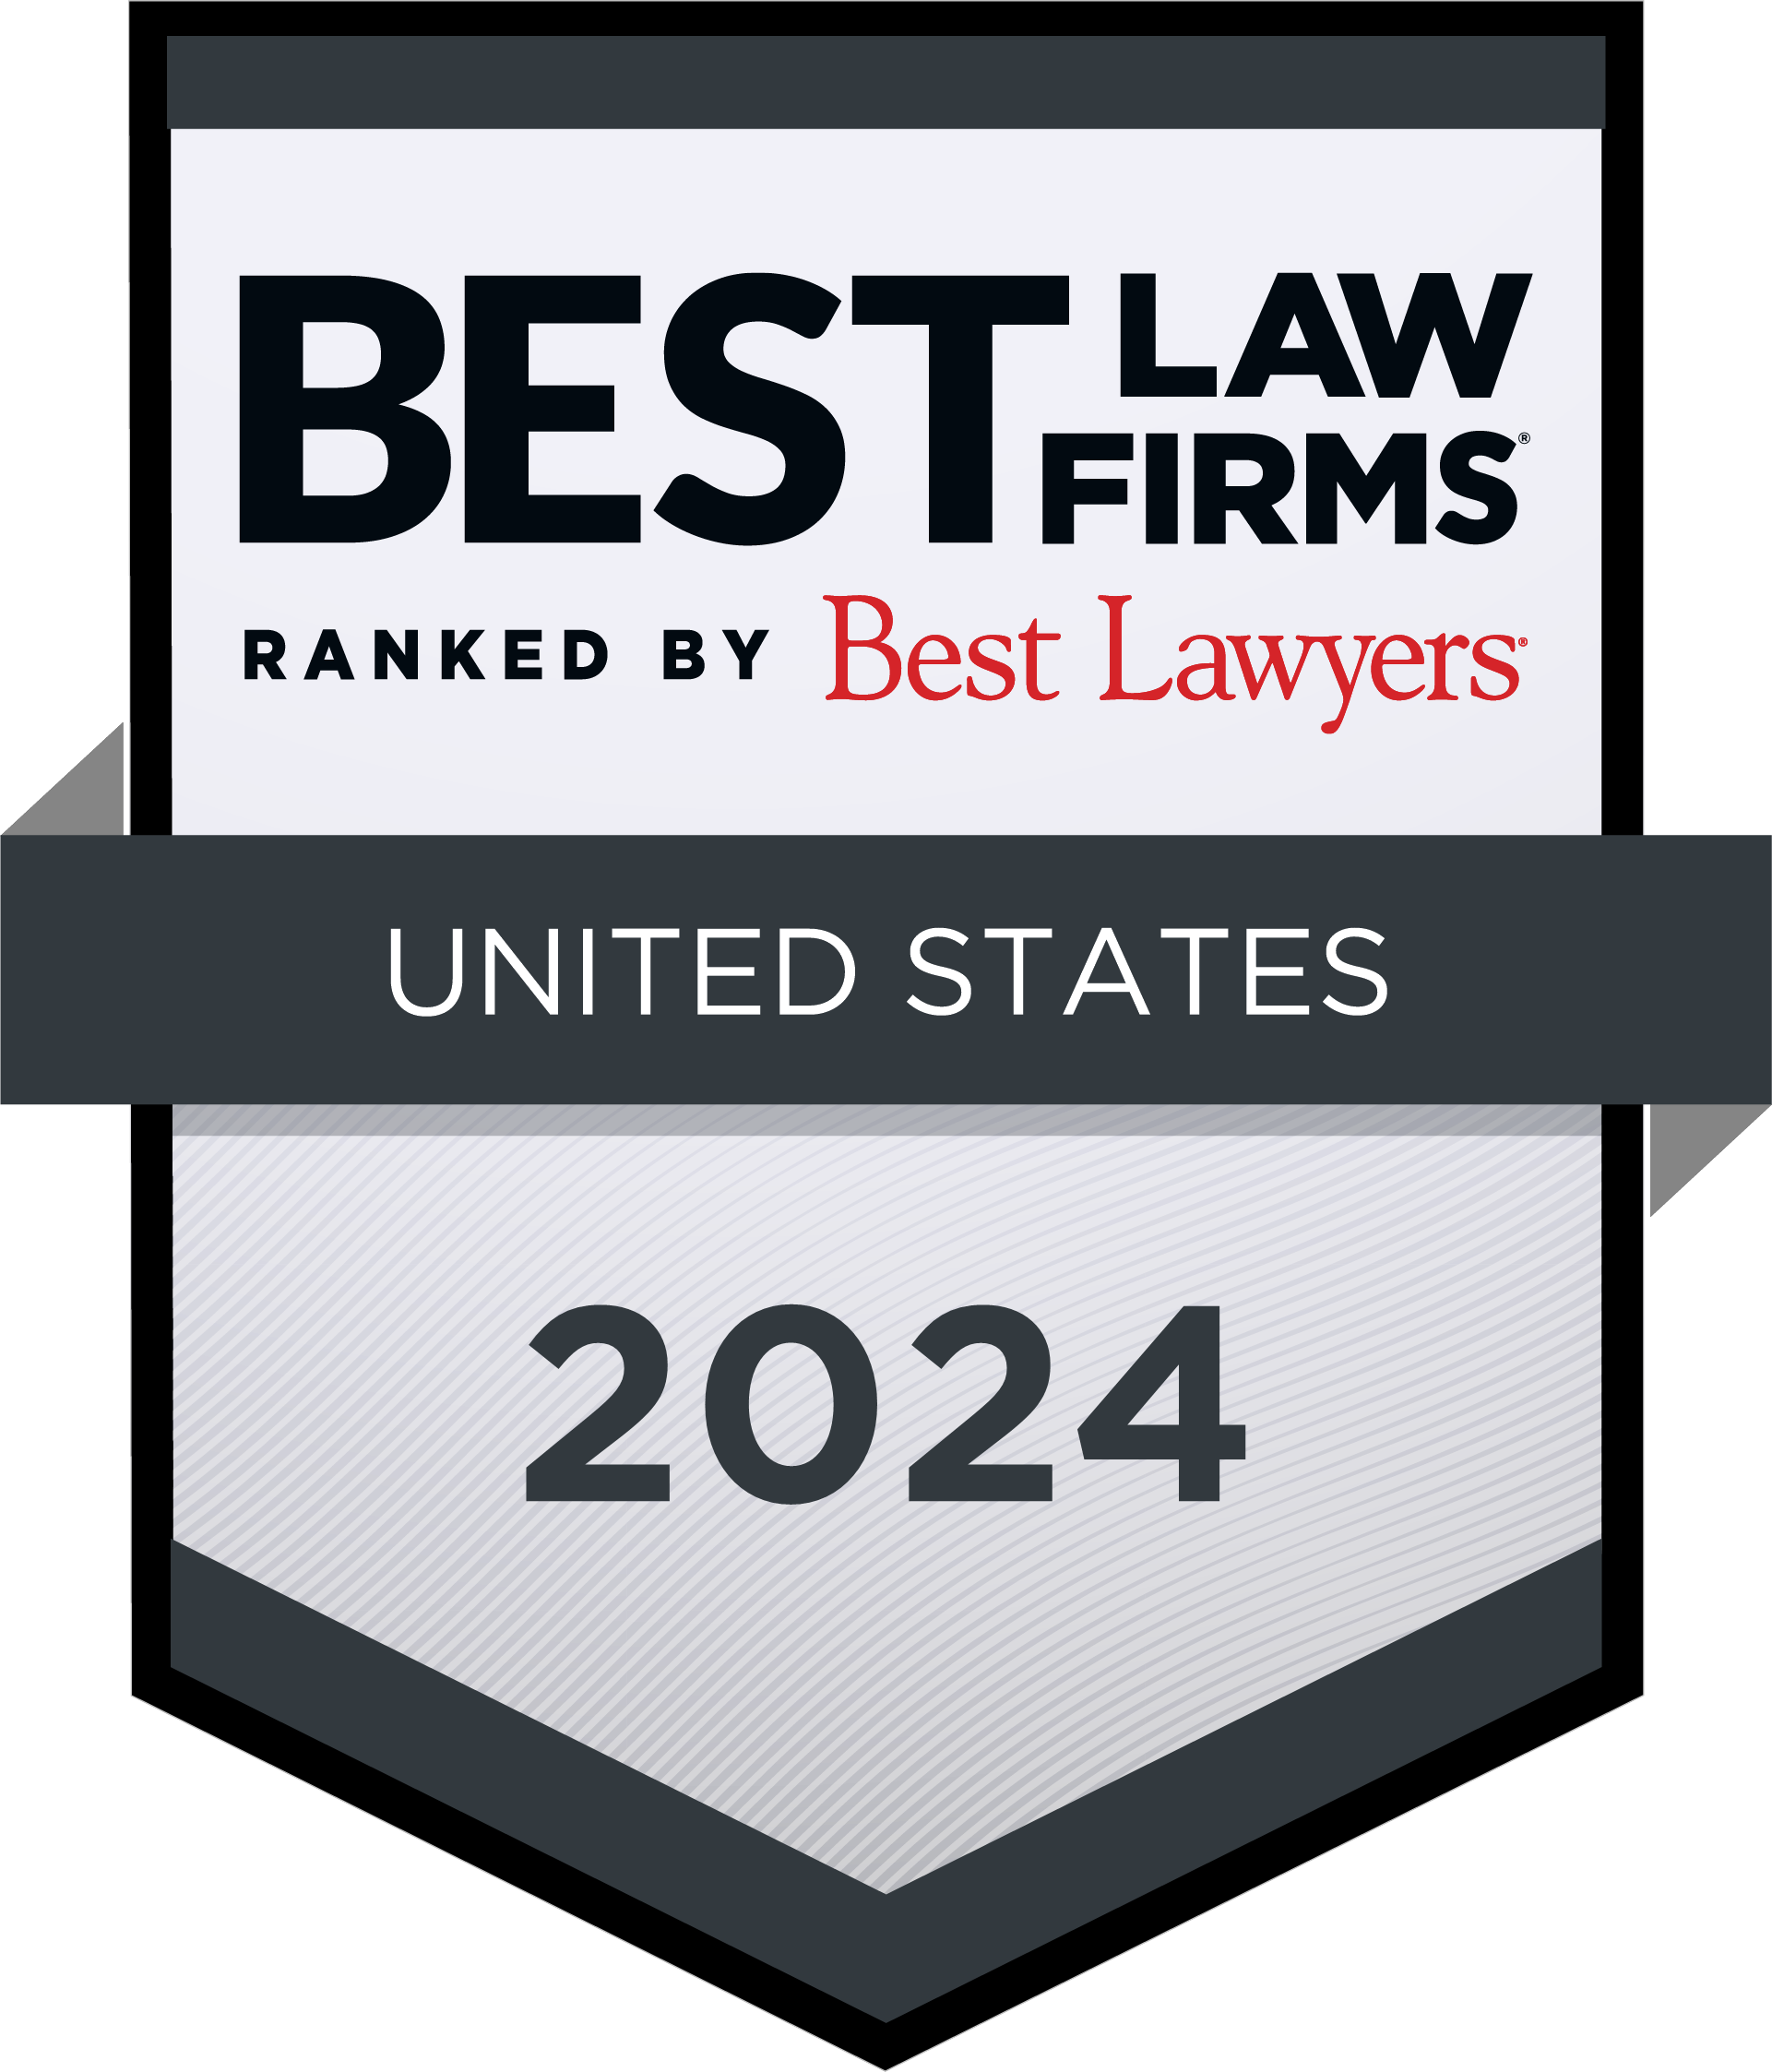 Best Law Firms by Best Lawyers 2024 badge